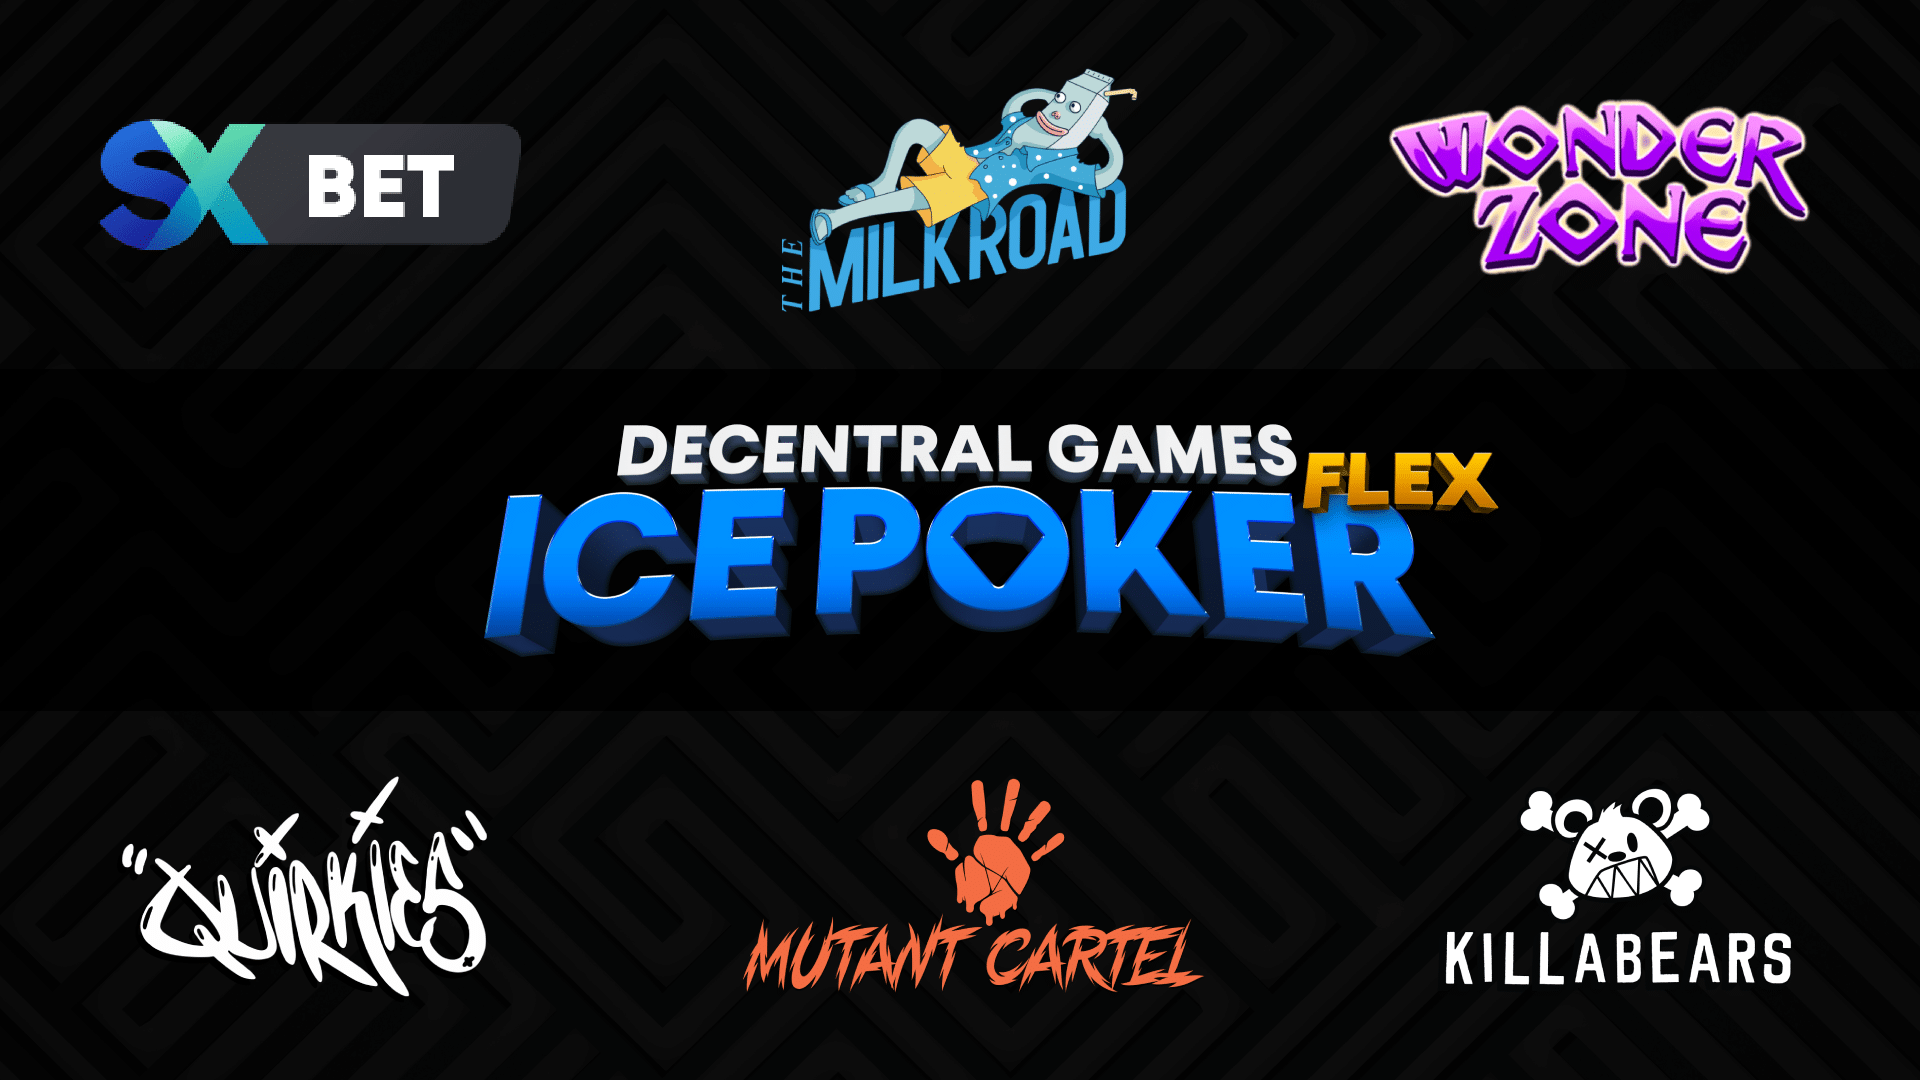 Decentral Games ICE Poker and various partners' logos